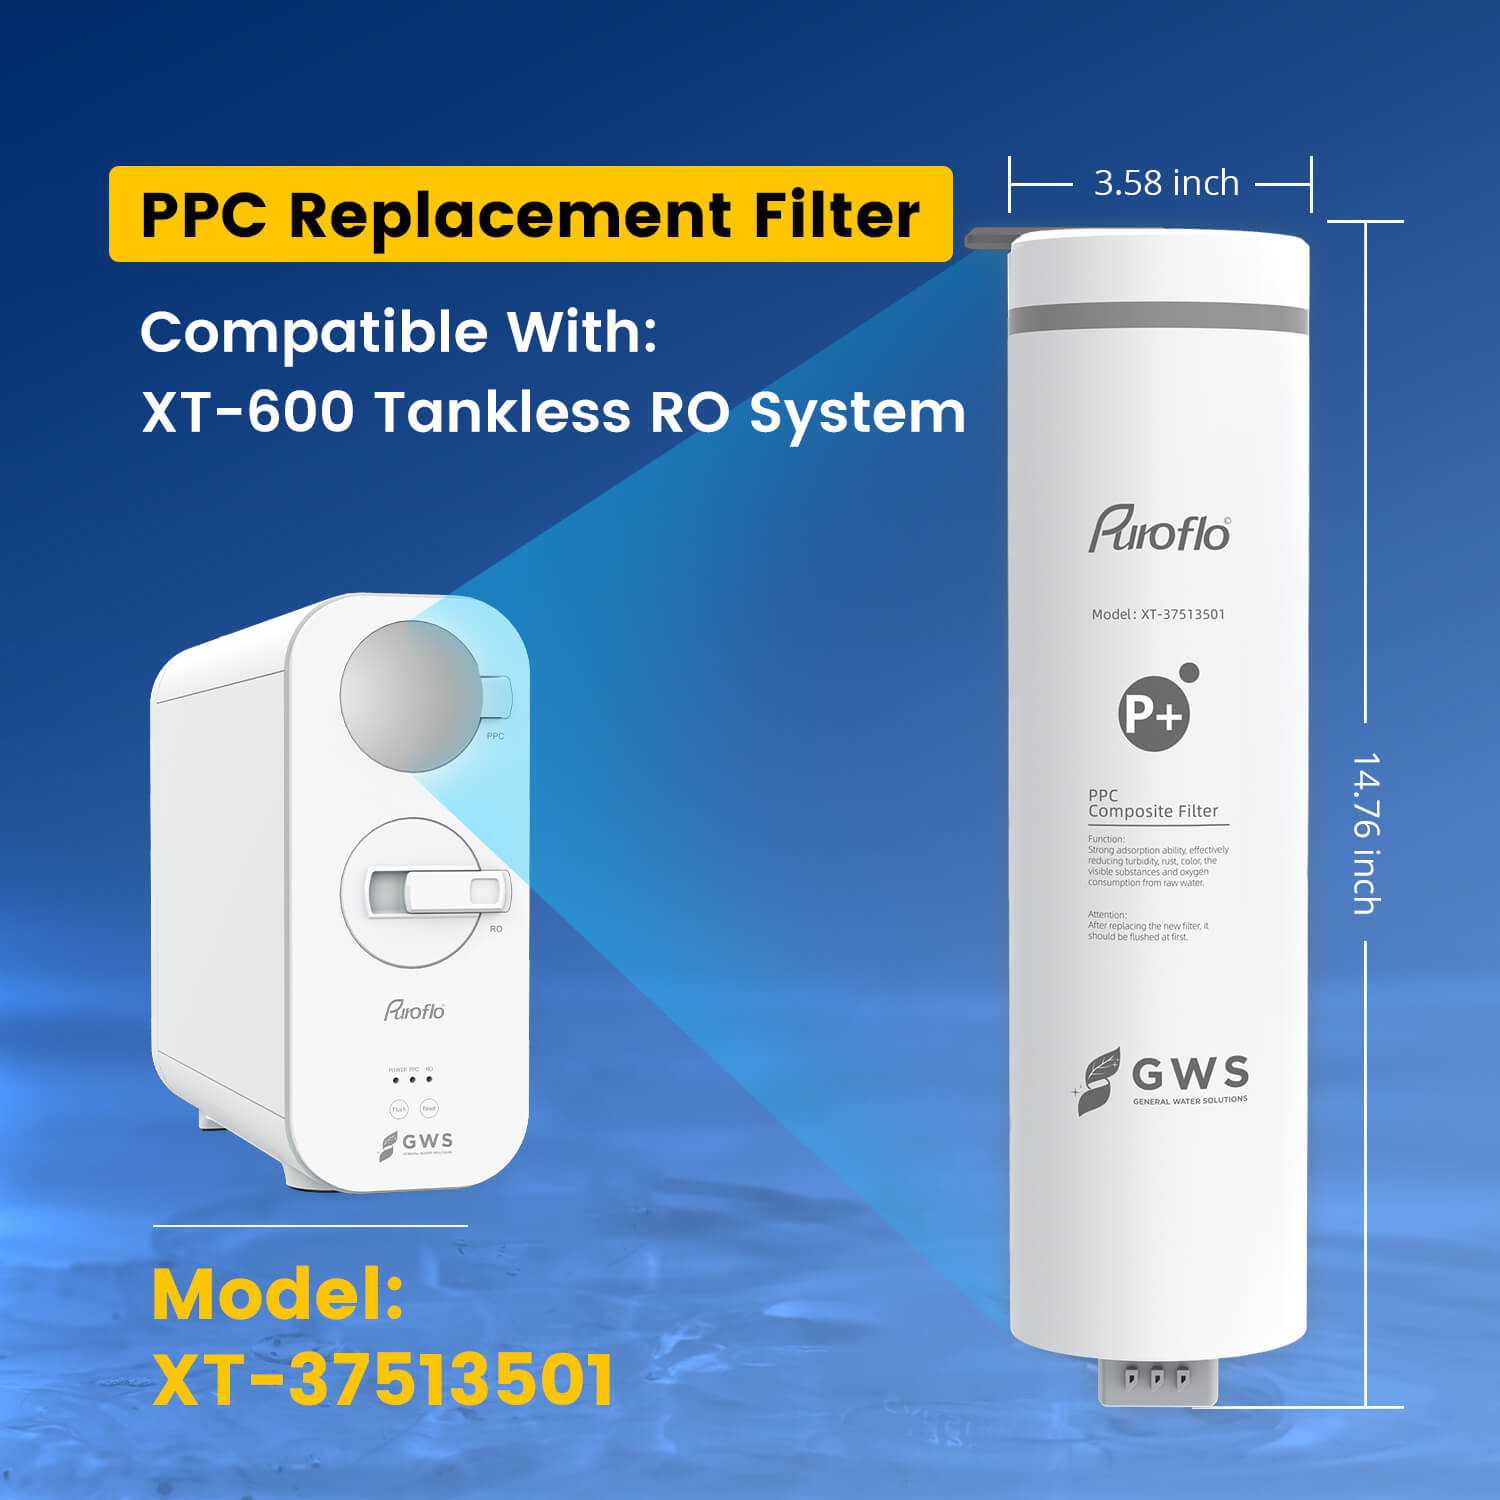 Puroflo PPC Replacement Filter, 1 Year Lifespan, Replacement for XT-600 Tankless Reverse Osmosis System, Reduces Large Particles of Impurities, Chlorine, Colors, and Odors XT-37513501 (1PACK)